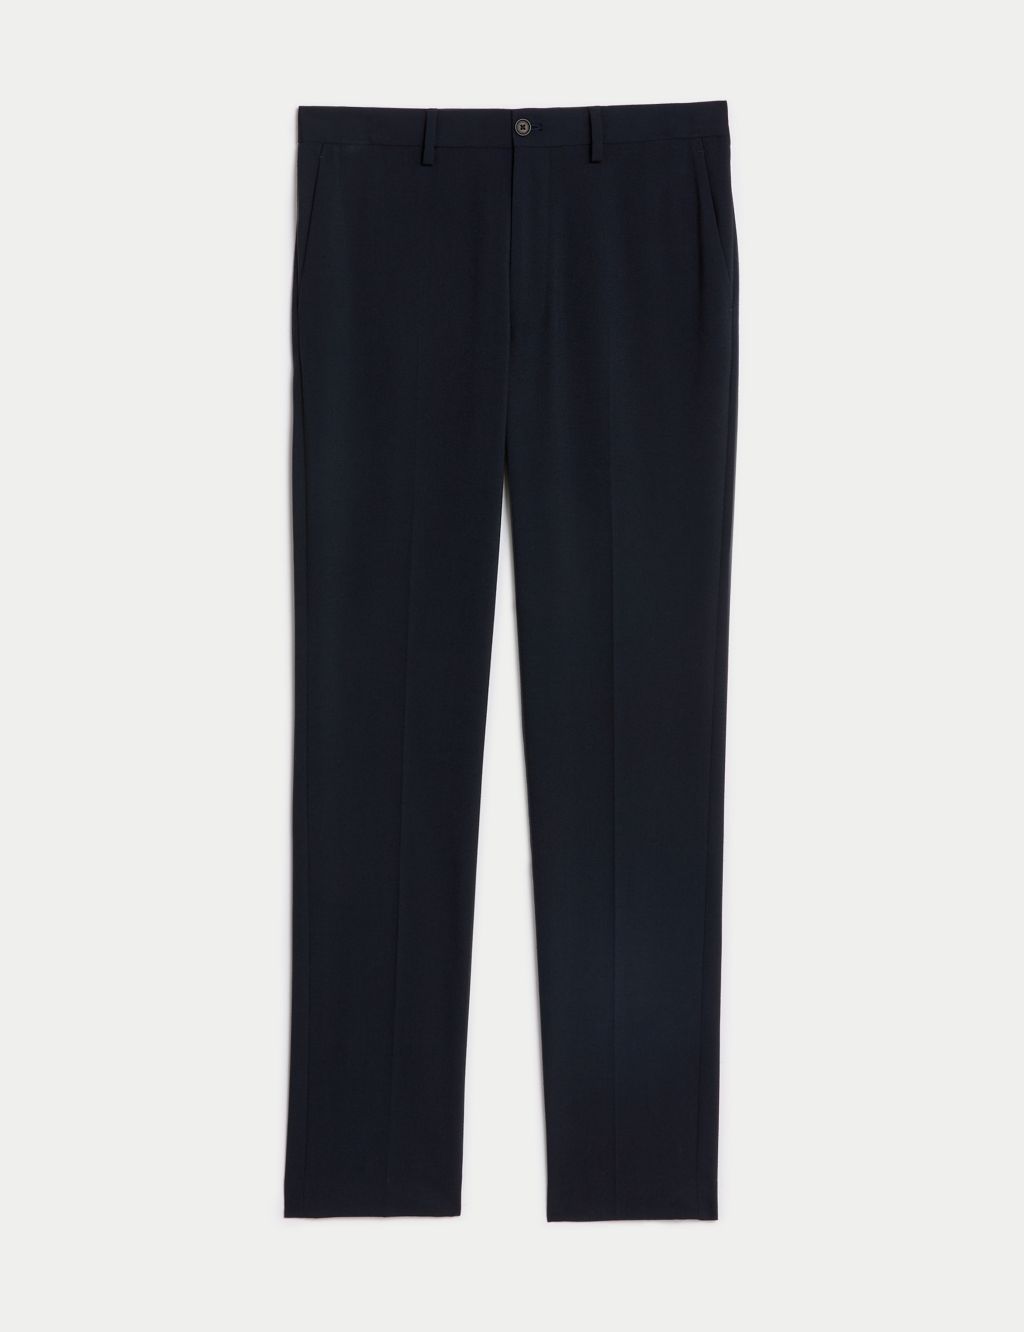 Slim Fit Flat Front Stretch Trousers image 1